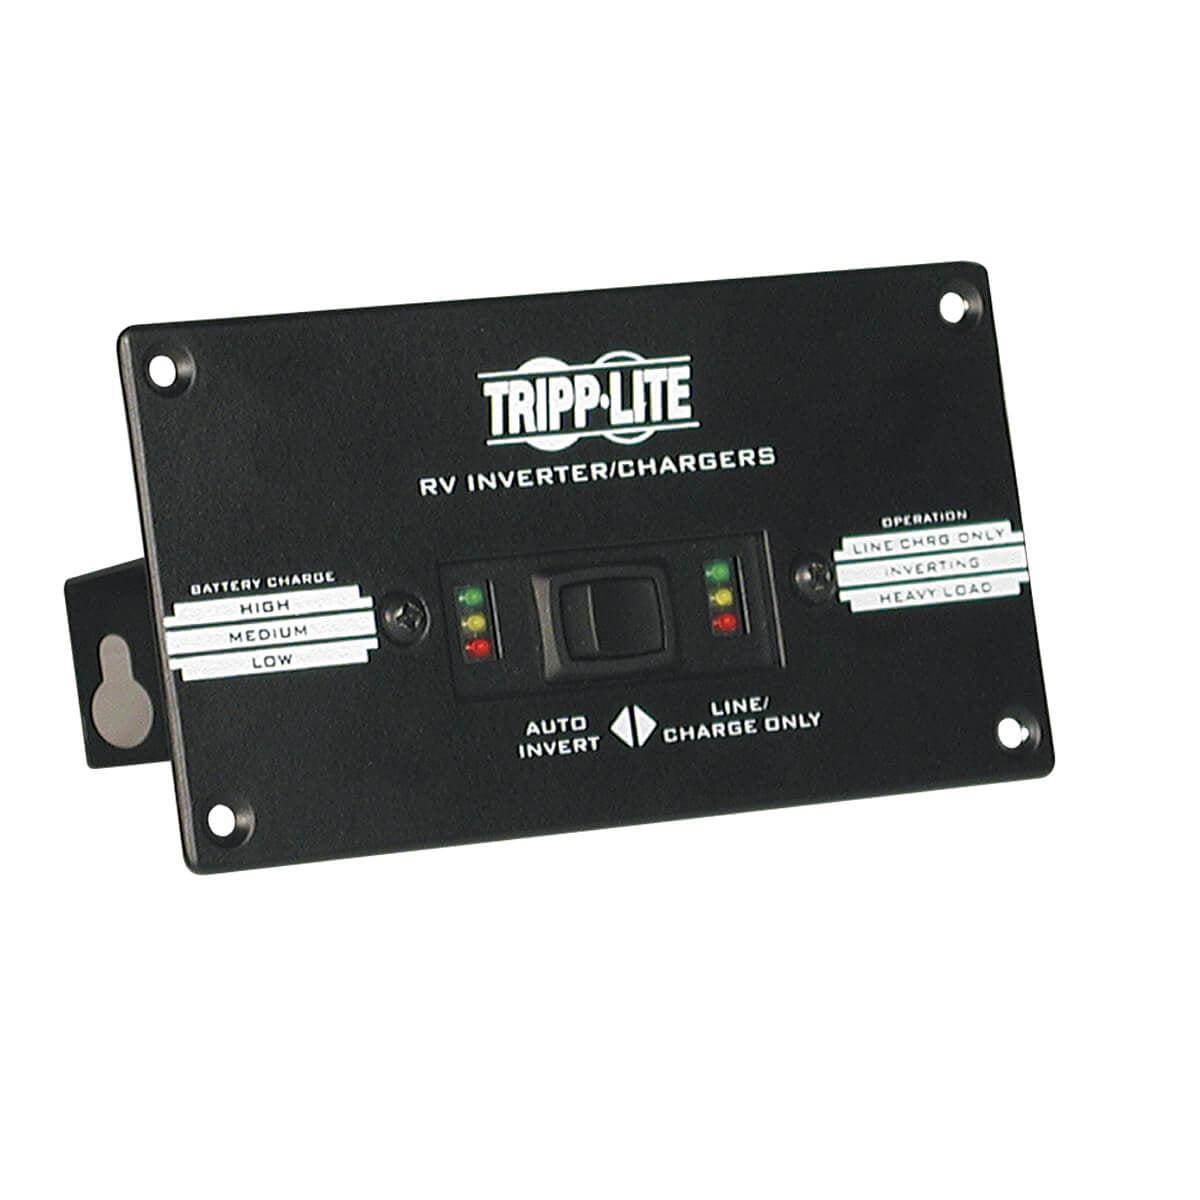 Tripp Lite Apsrm4 Remote Control Module For Powerverter Inverters And Inverter/Chargers